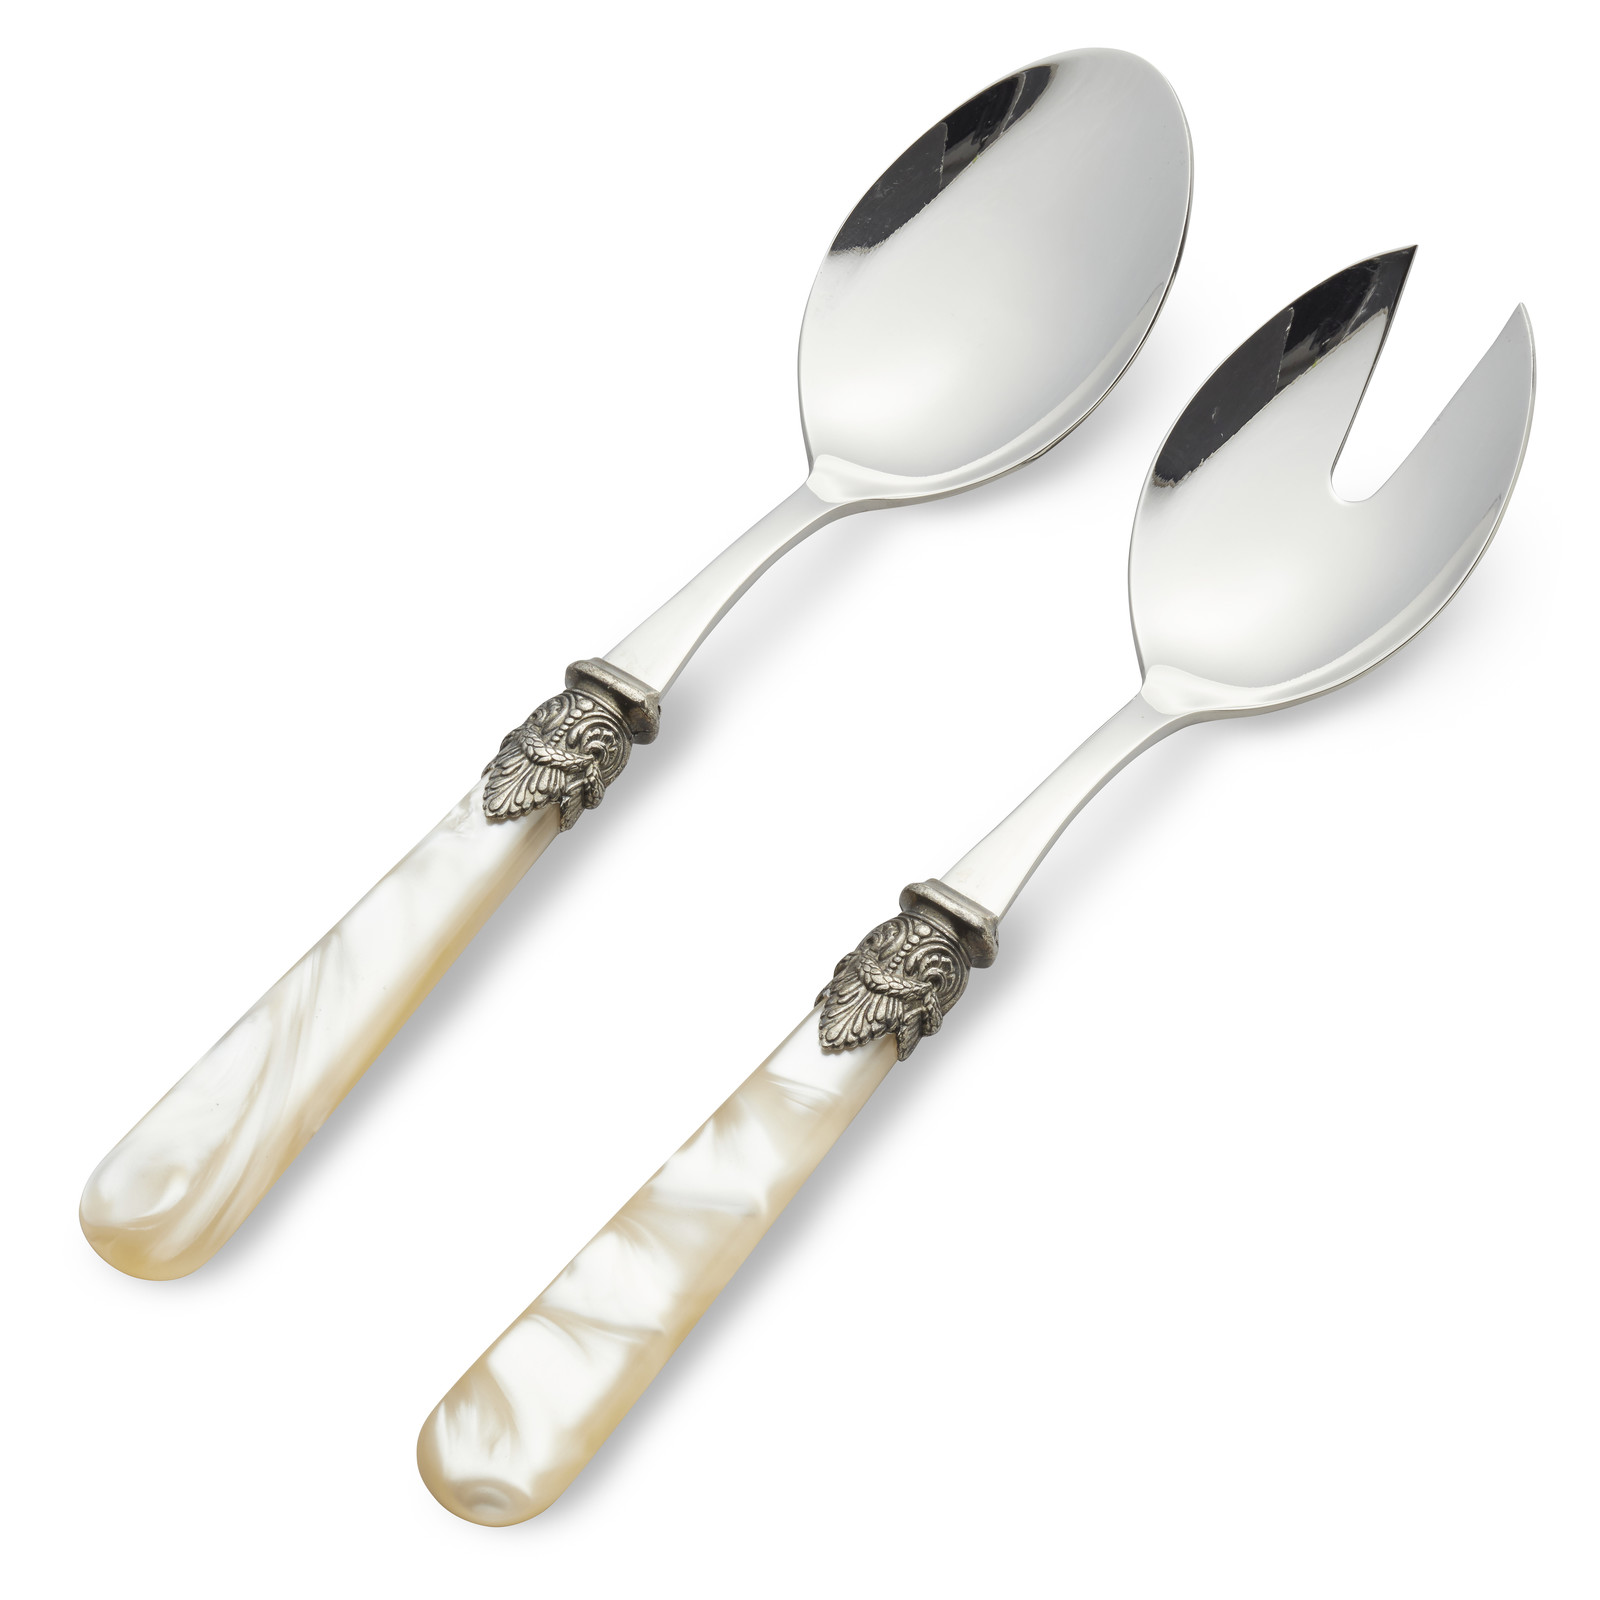 Salad cutlery set, 2-piece (salad spoon and salad fork)  Ivory with Mother of Pearl